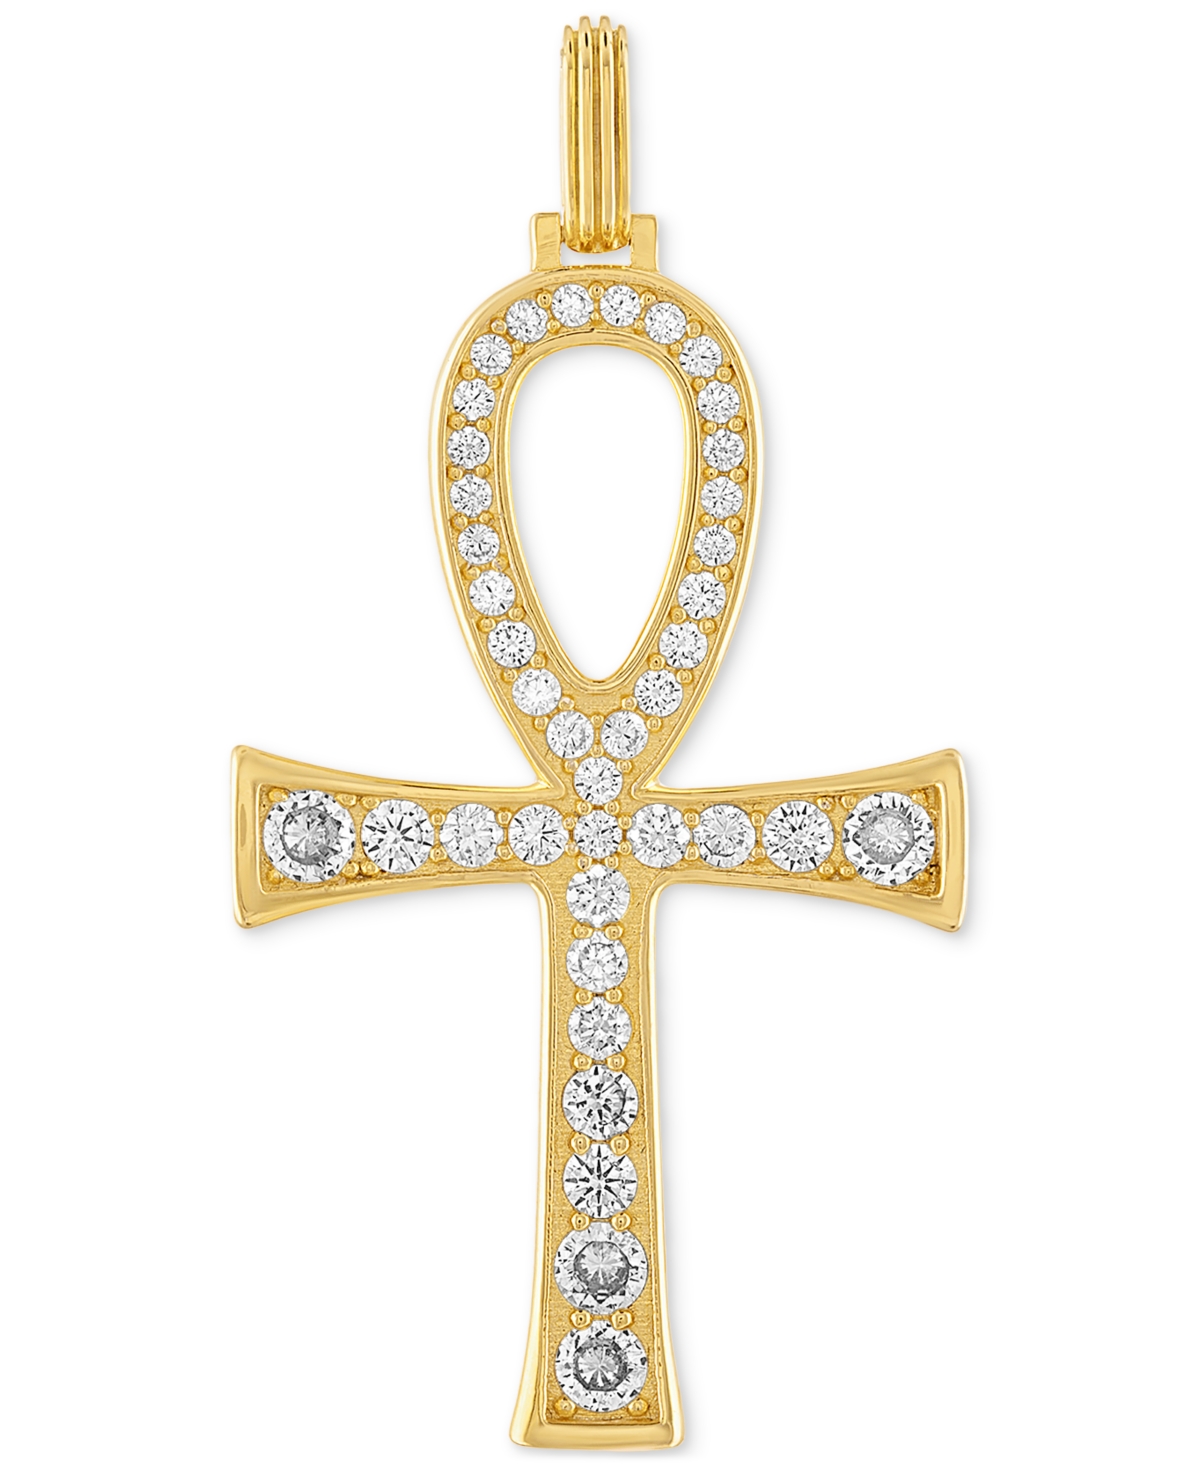 Cubic Zirconia Ankh Pendant in 14k Gold-Plated Sterling Silver, Created for Macy's - Gold Over Silver